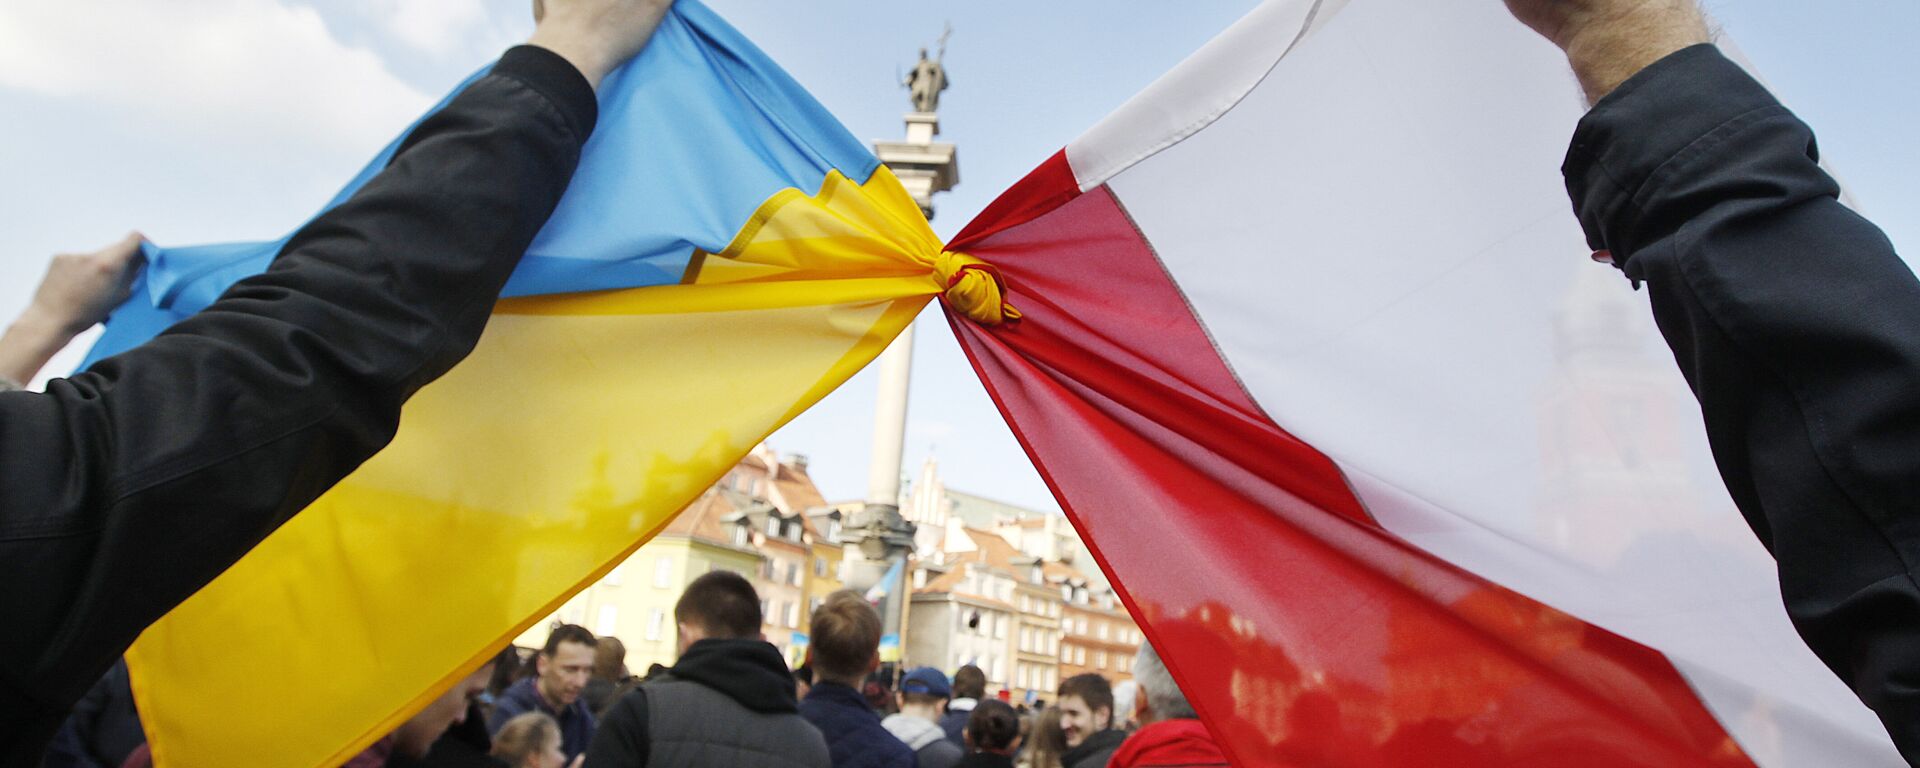 People hold tied Polish, right, and Ukrainian flags during a demonstration supporting the opposition movement in Ukraine, in Warsaw, Poland, Sunday, Feb. 23, 2014 - Sputnik International, 1920, 09.12.2023